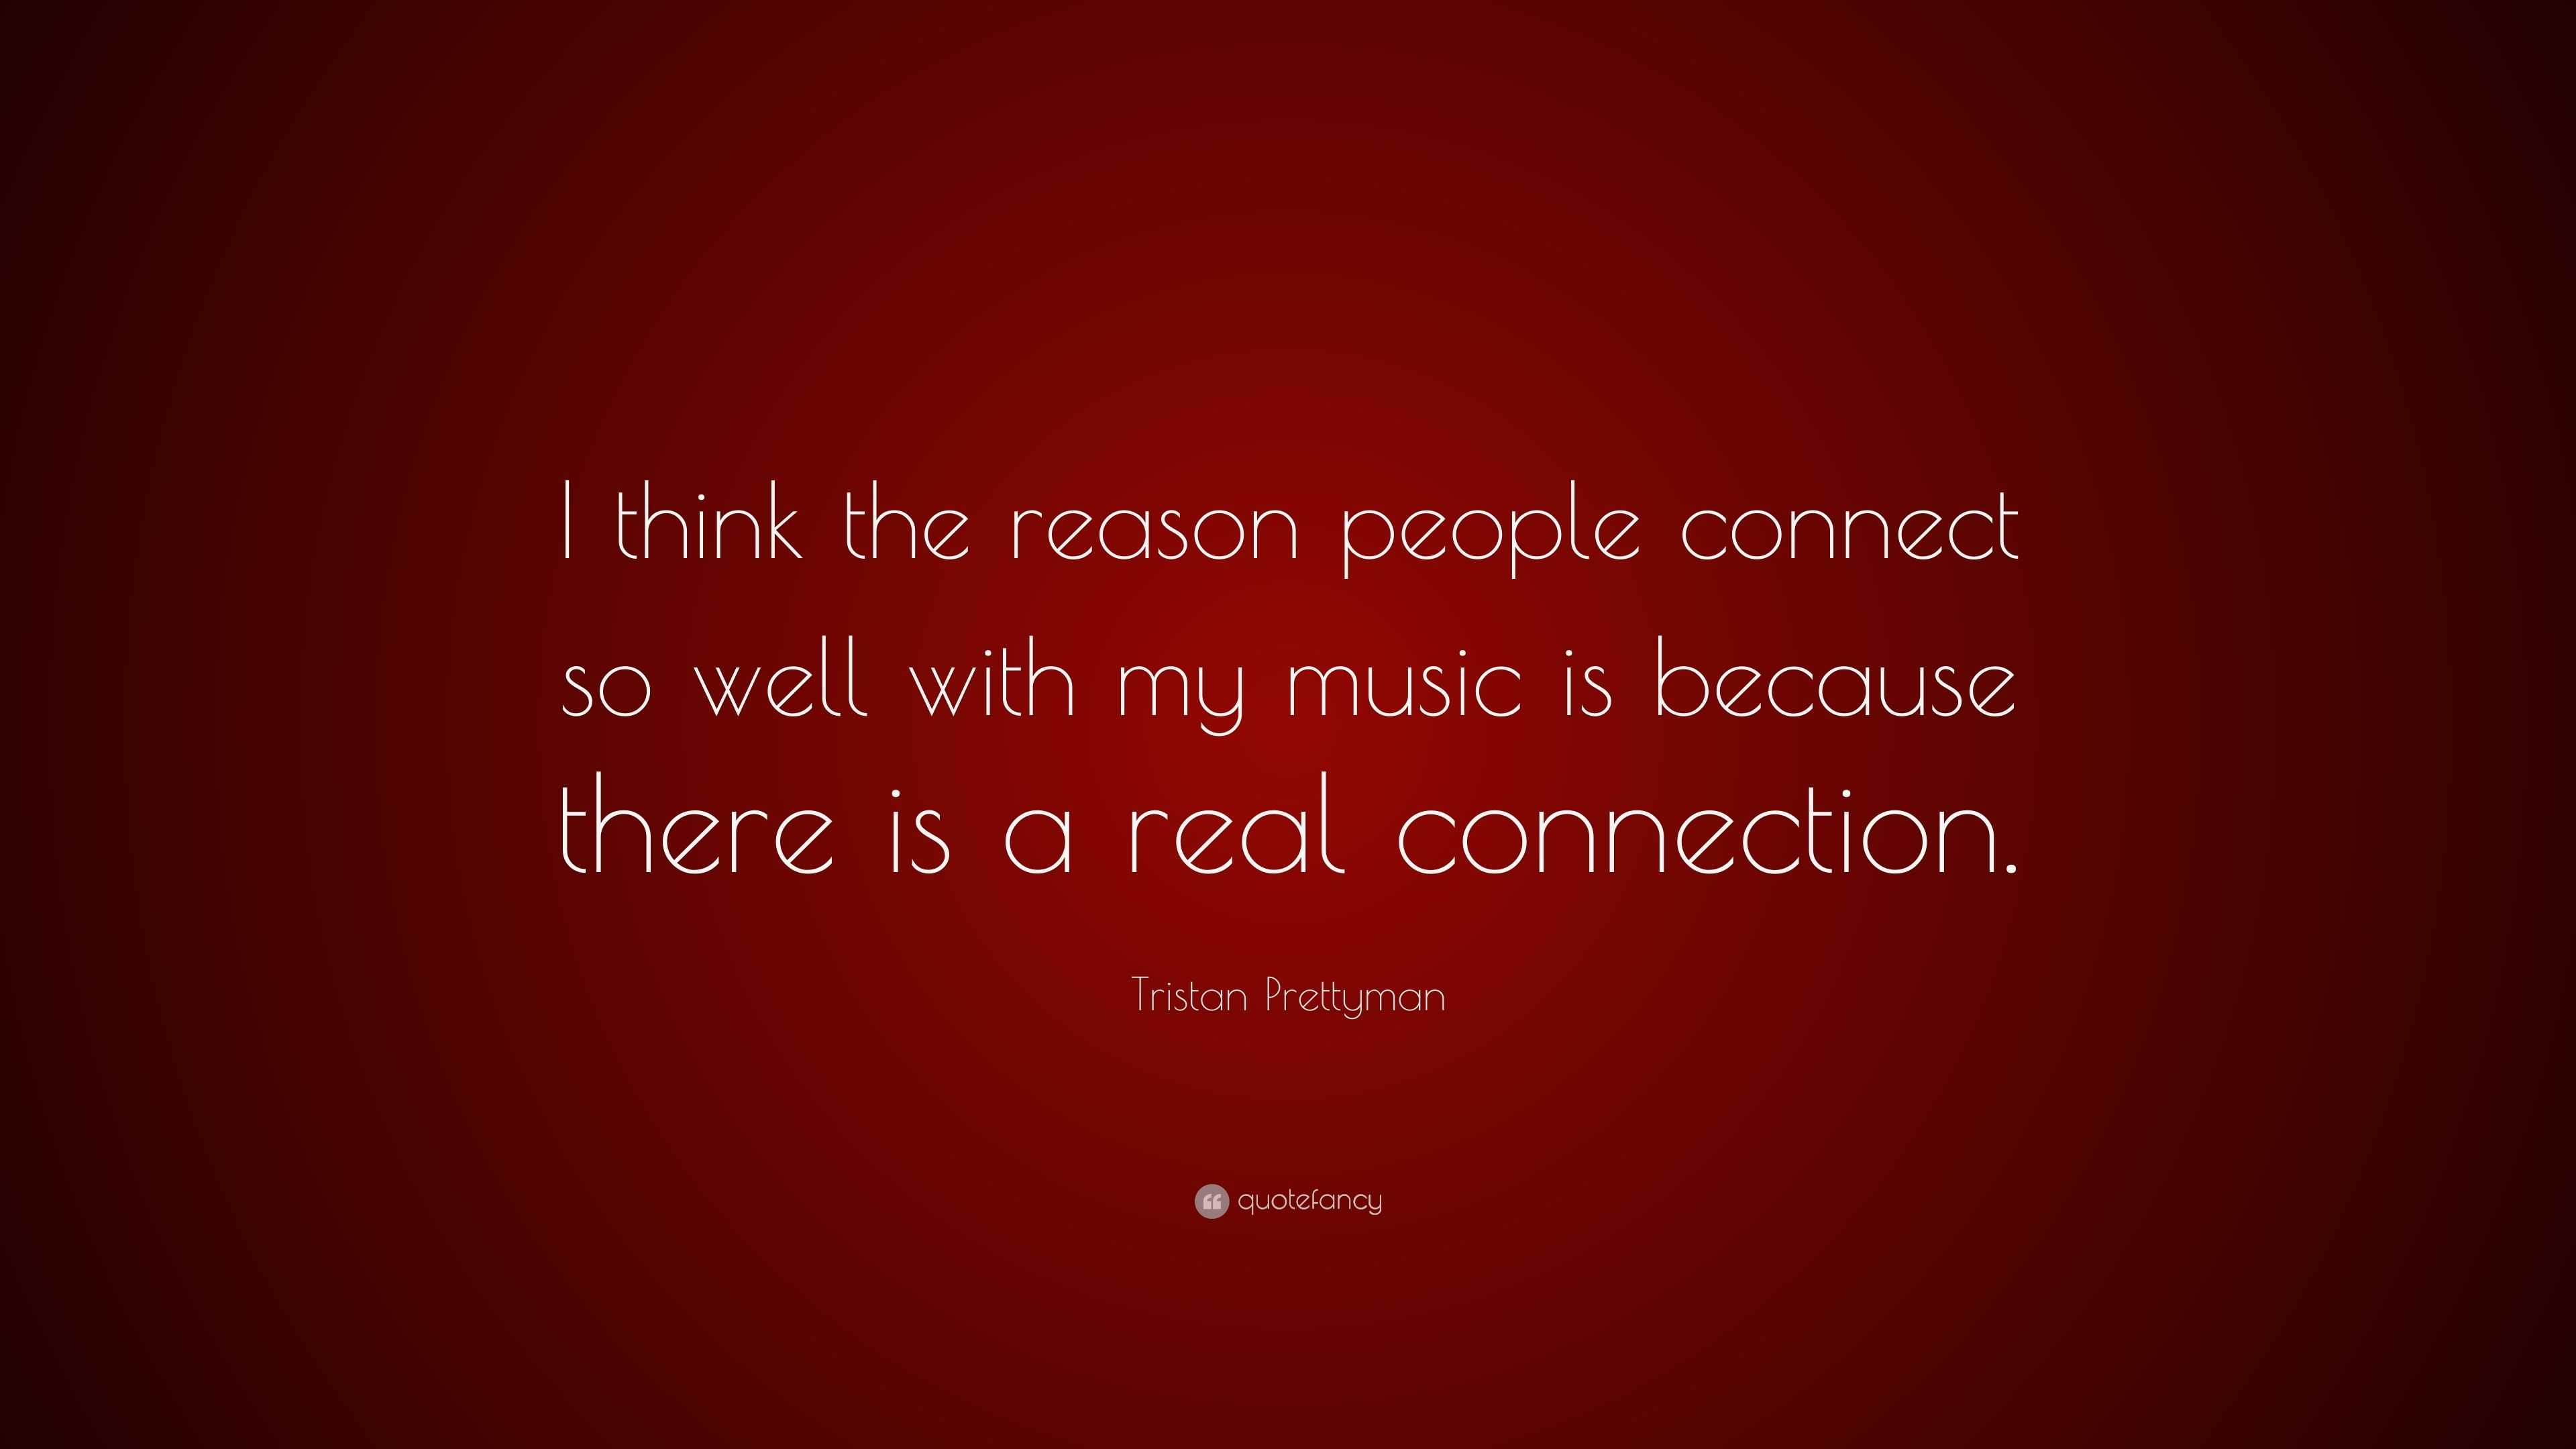 https://quotefancy.com/media/wallpaper/3840x2160/3061534-Tristan-Prettyman-Quote-I-think-the-reason-people-connect-so-well.jpg